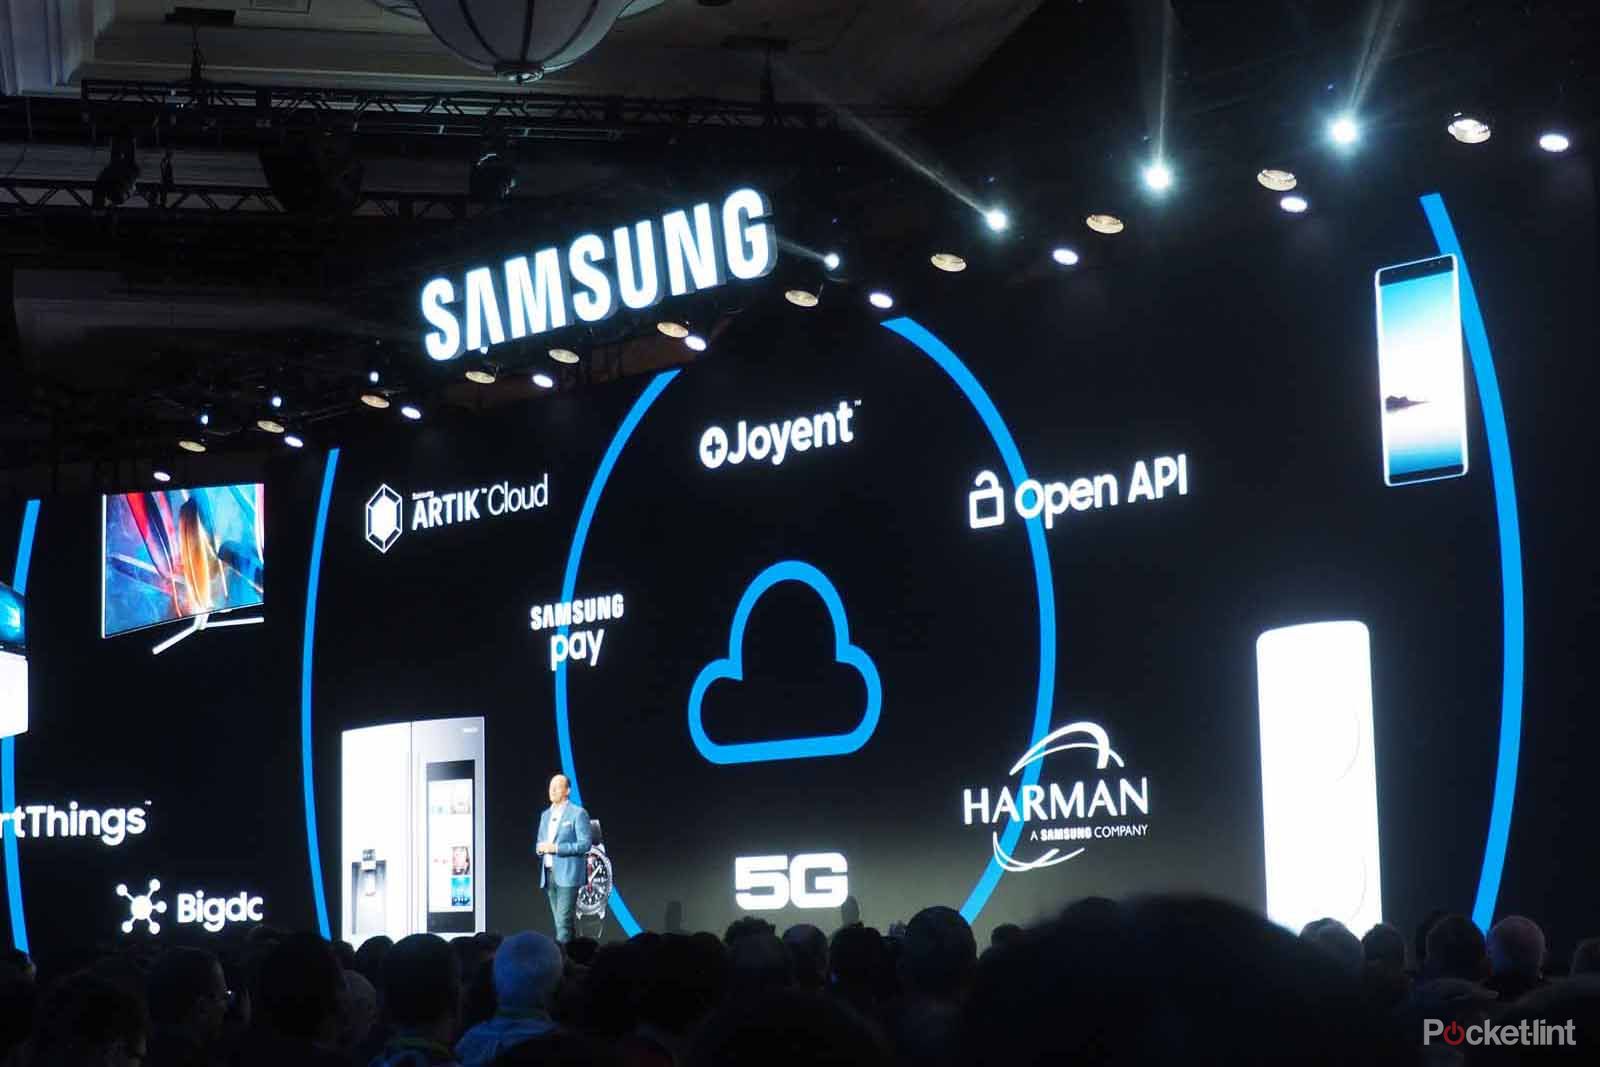 Samsung All our devices will be connected and intelligent by 2020 image 6